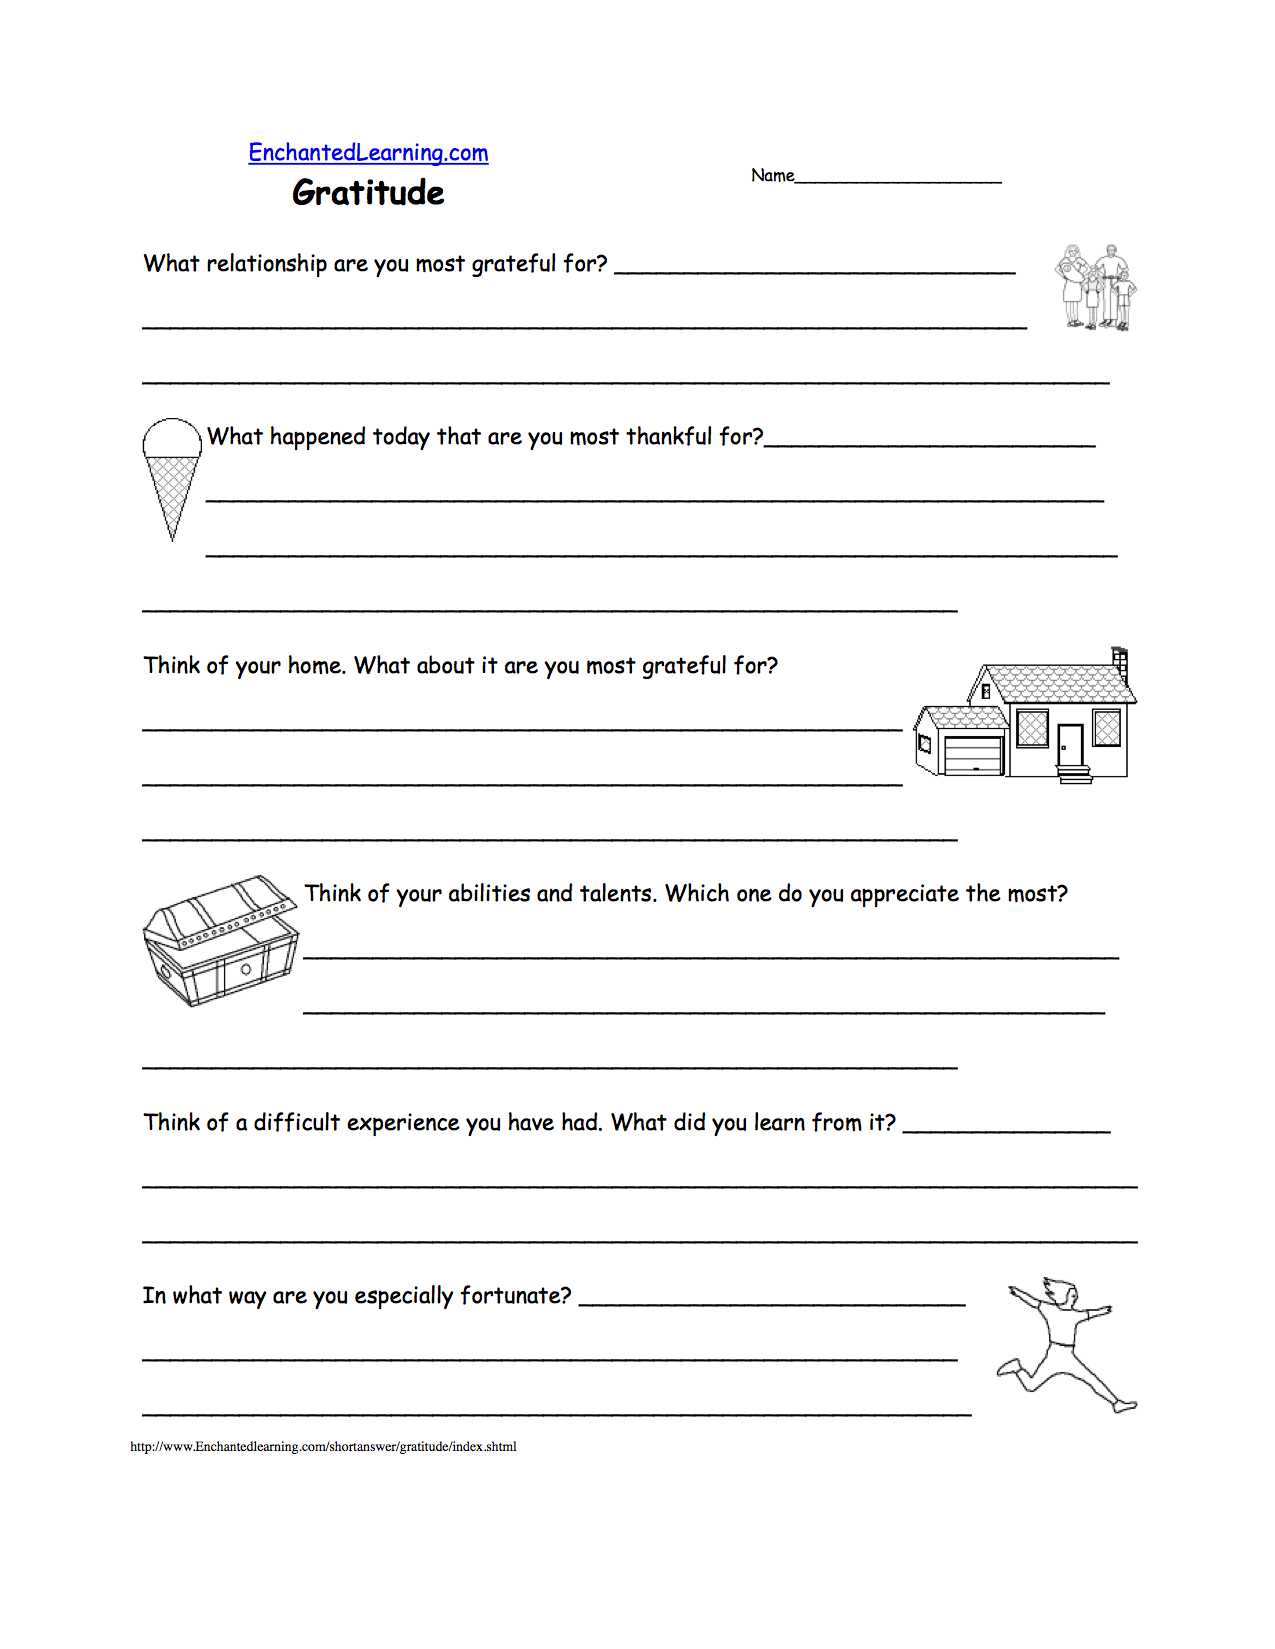 12 Angry Men Worksheet Answers Also Happiness at Enchantedlearning